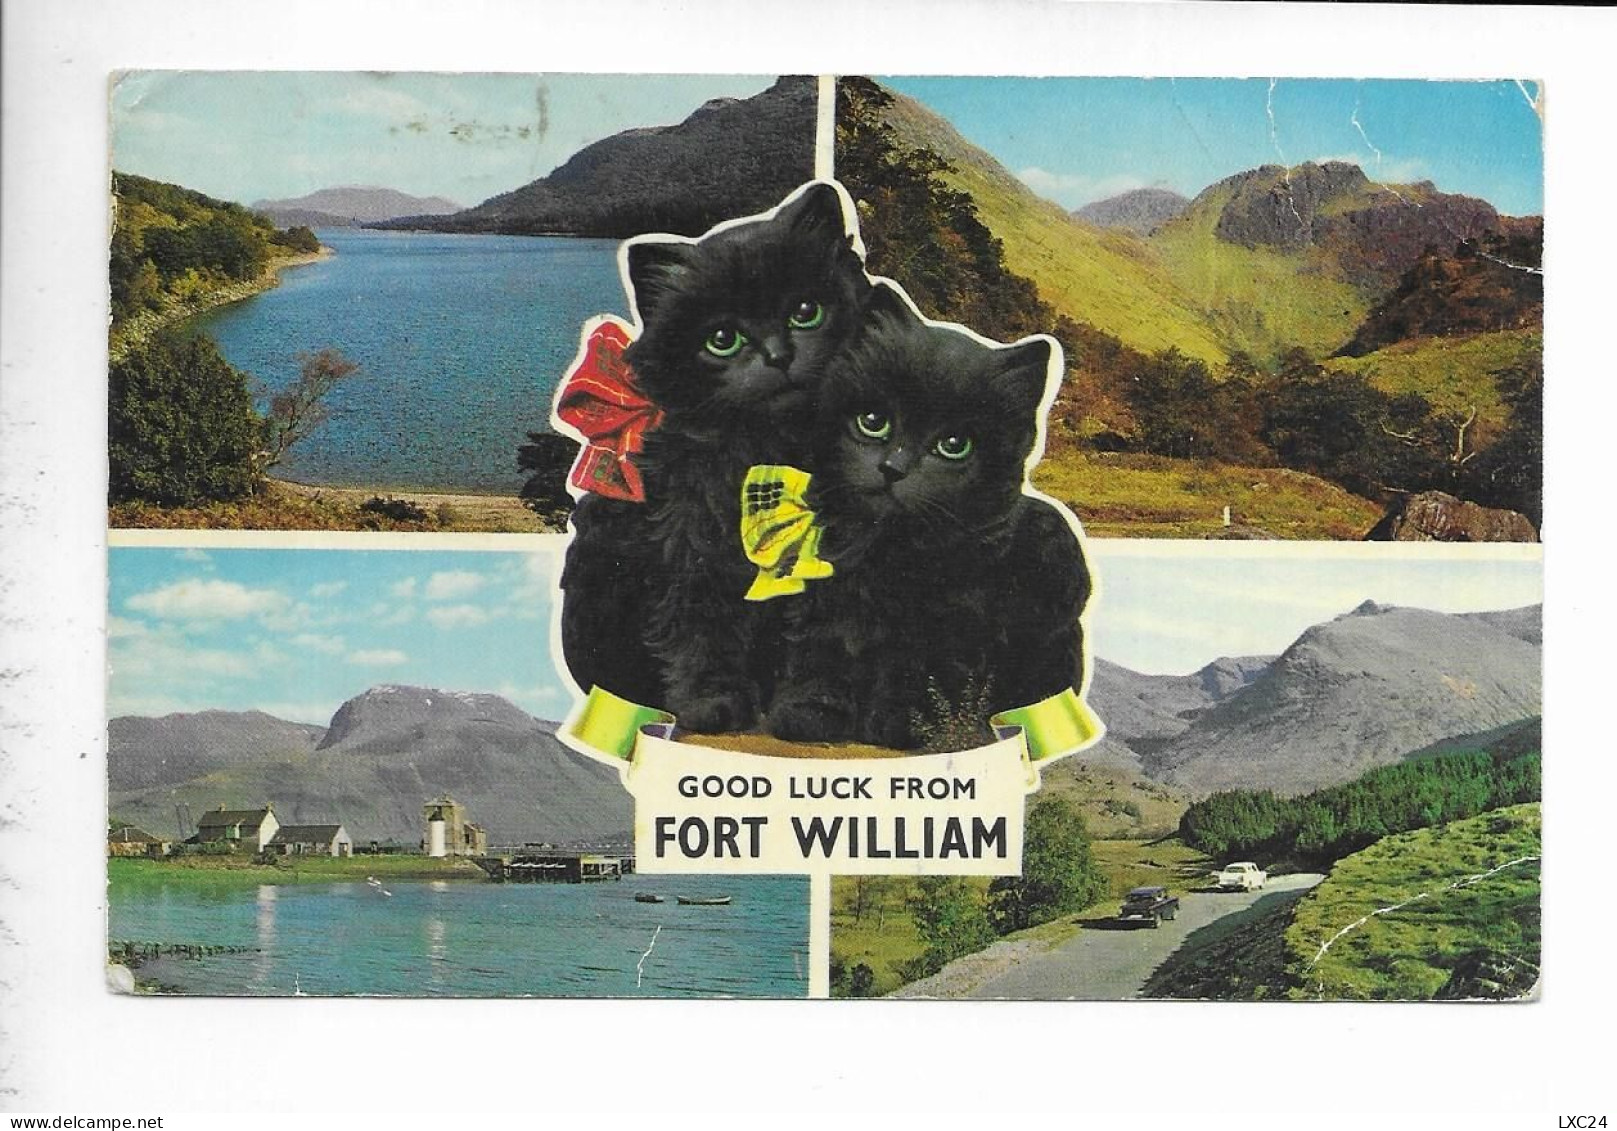 GOOD LUCK FROM FORT WILLIAM. - Inverness-shire